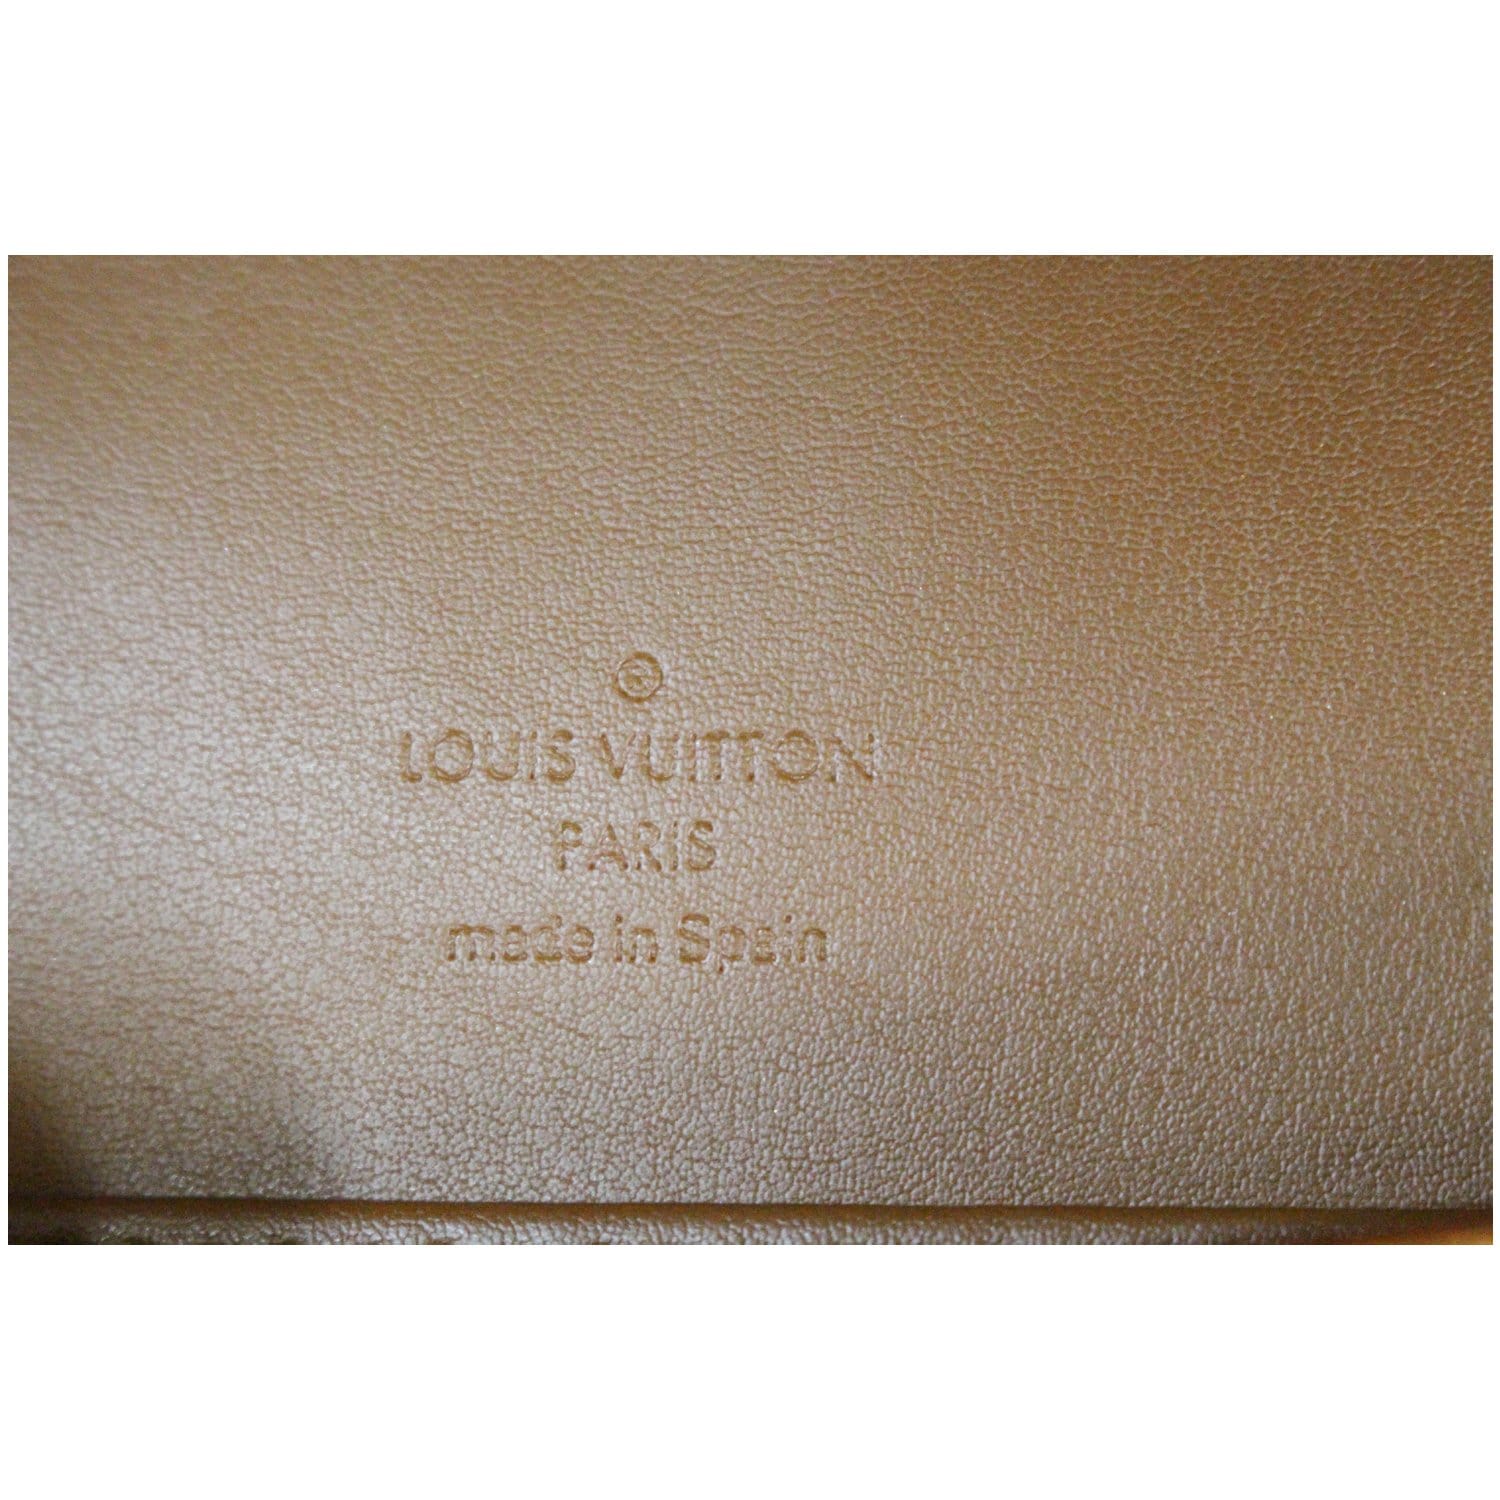 Louis Vuitton: A Pre-Owned Reference Guide : Thompson, Deanna